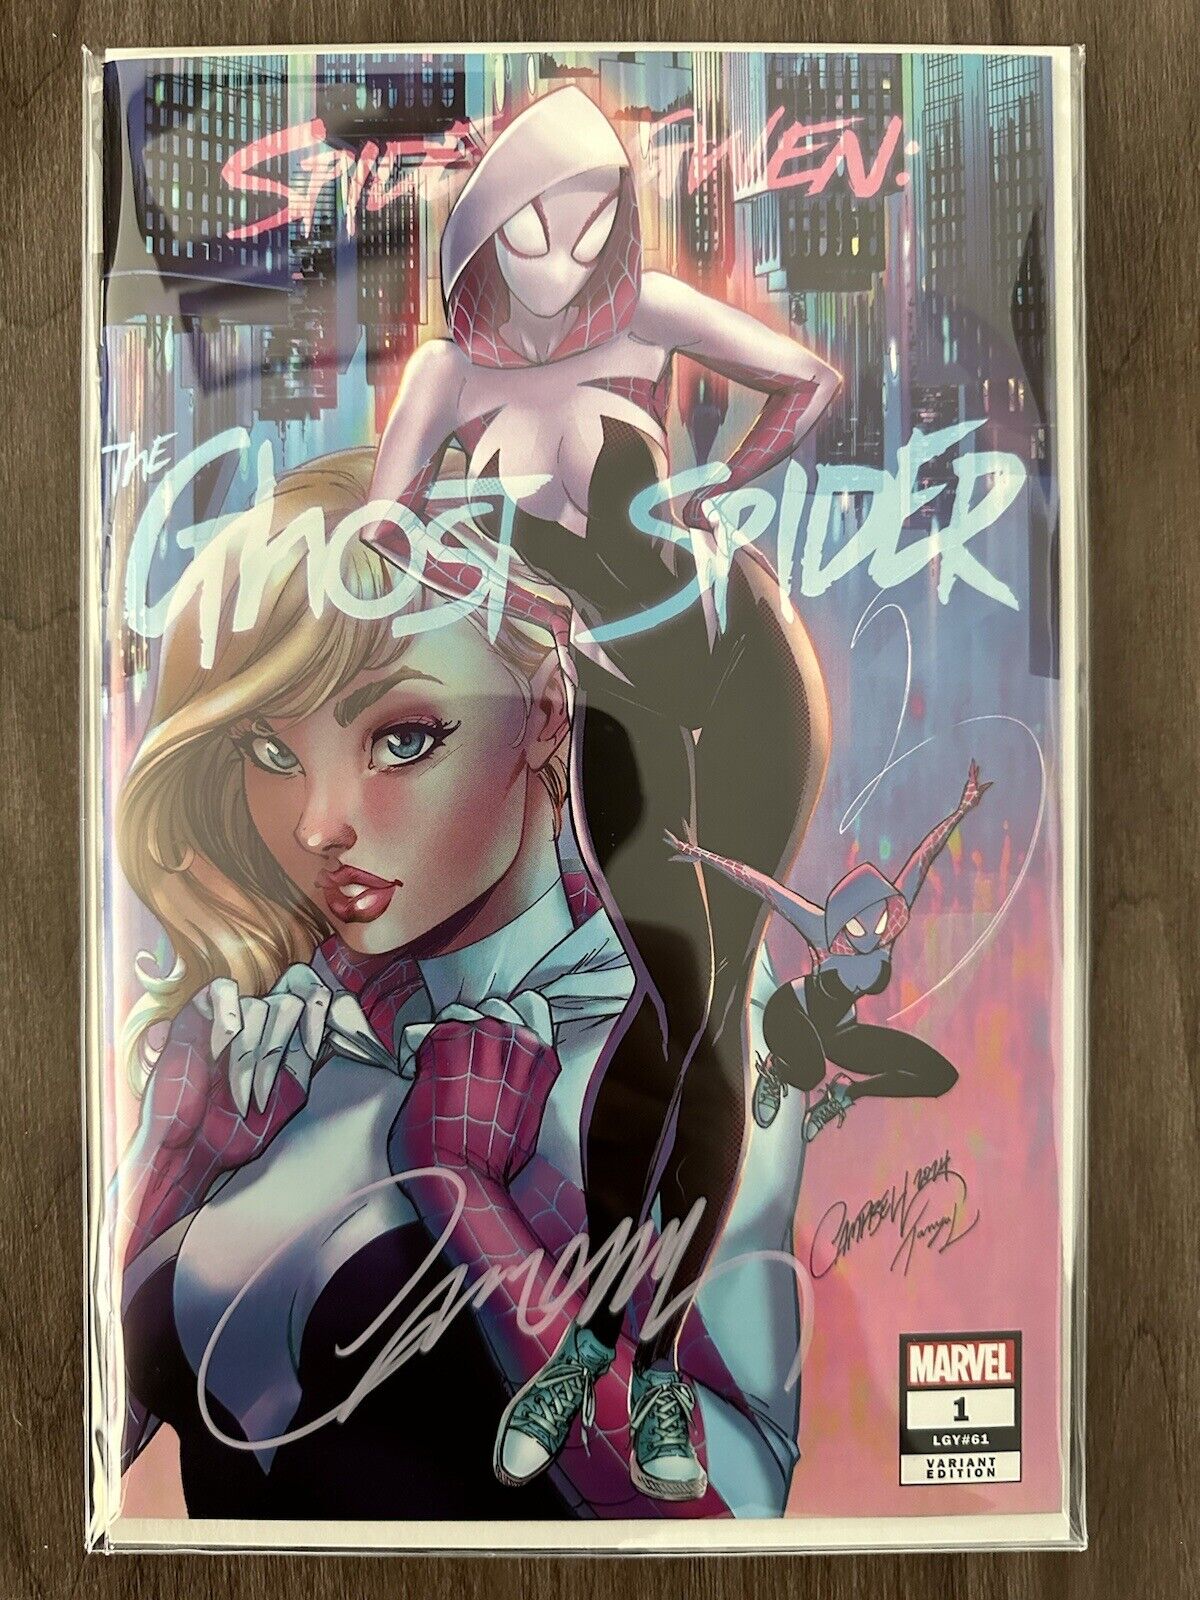 Spider-Gwen: The Ghost-Spider #1 J Scott Campbell JSC Signed Set A & B - IN HAND